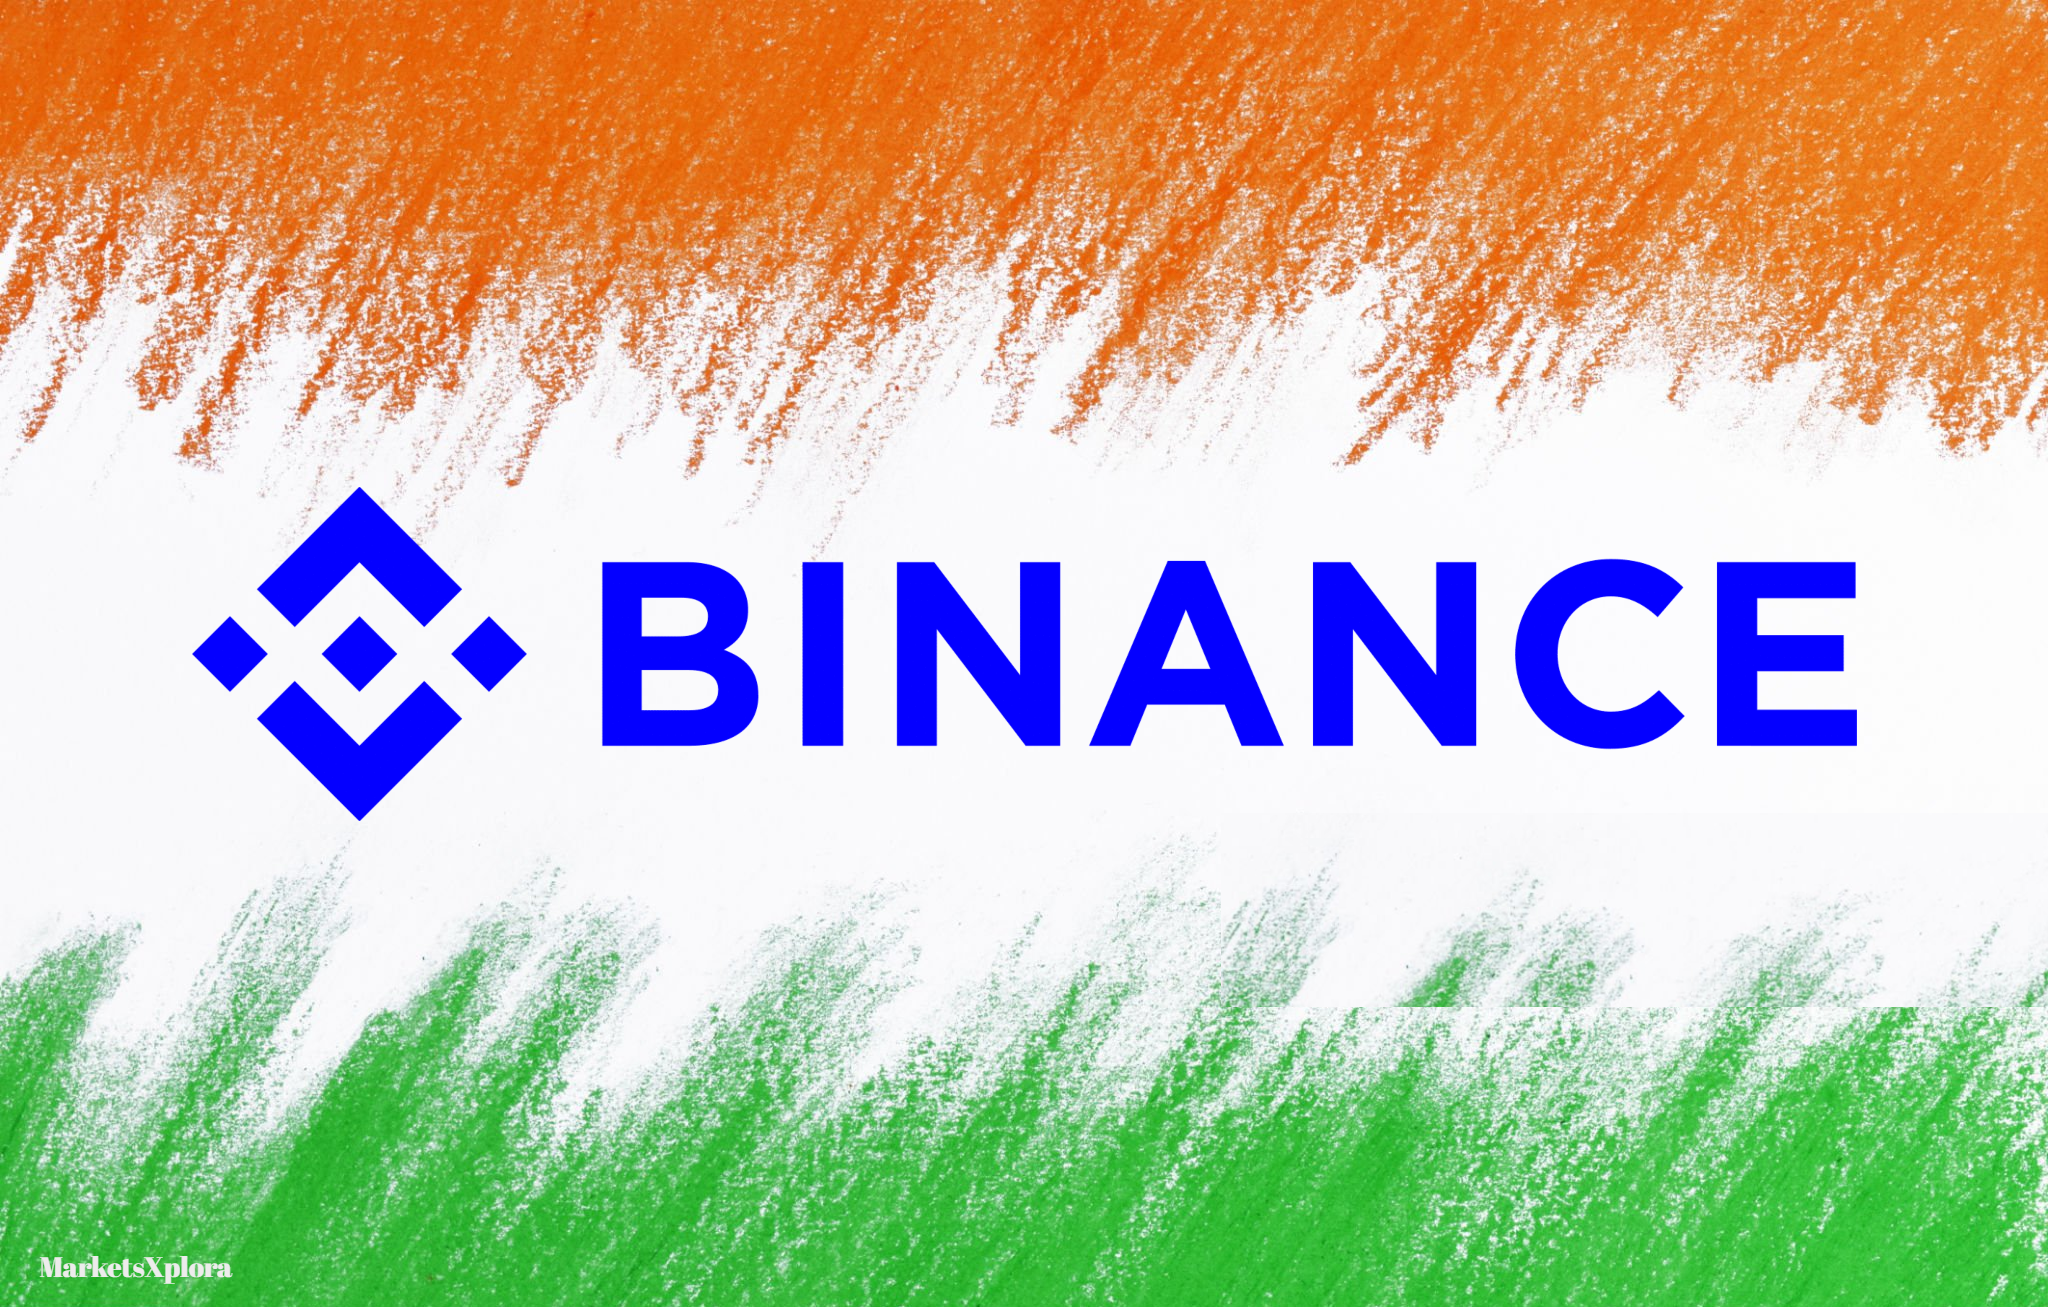 India's Financial Intelligence Unit has imposed a penalty of 188.2 million rupees ($2.25 million) on cryptocurrency exchange Binance for violating anti-money laundering regulations while operating in the country without proper registration.